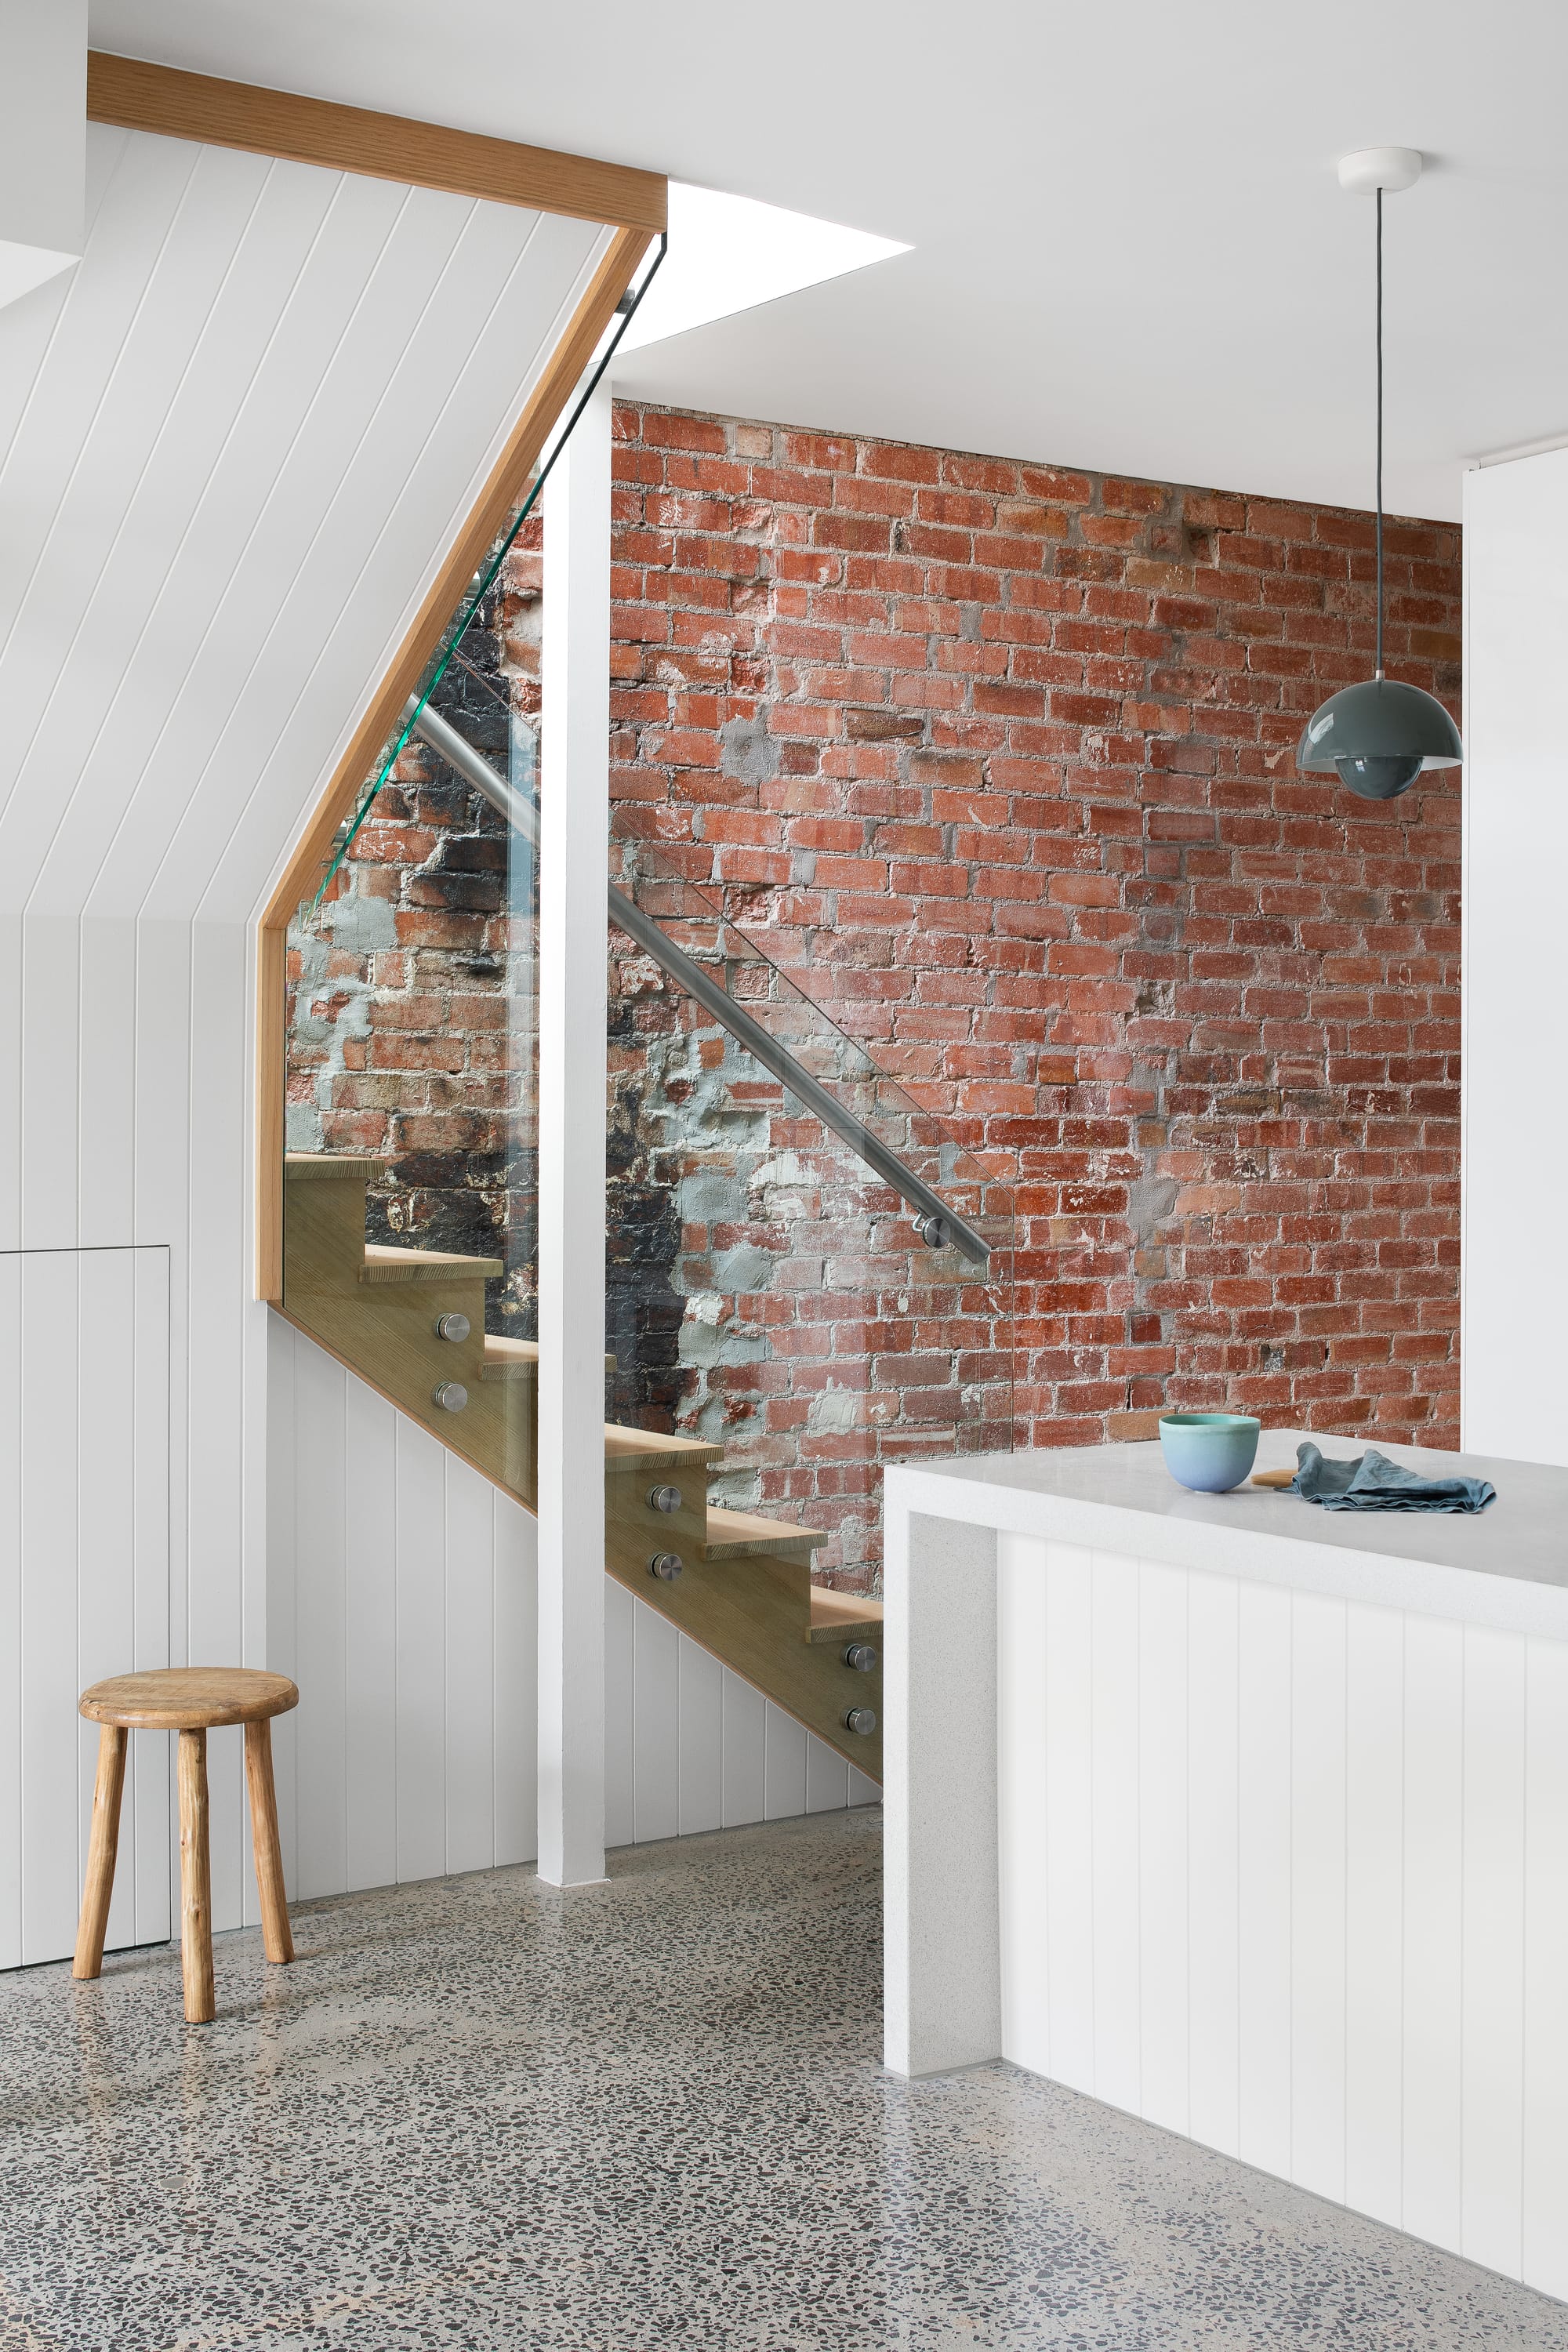 Stead House by Hannaford Design Studio. Photography by Emily Bartlett. Exposed brick wall behind timber staircase with glass balustrade. White clad kitchen island with white countertop. 